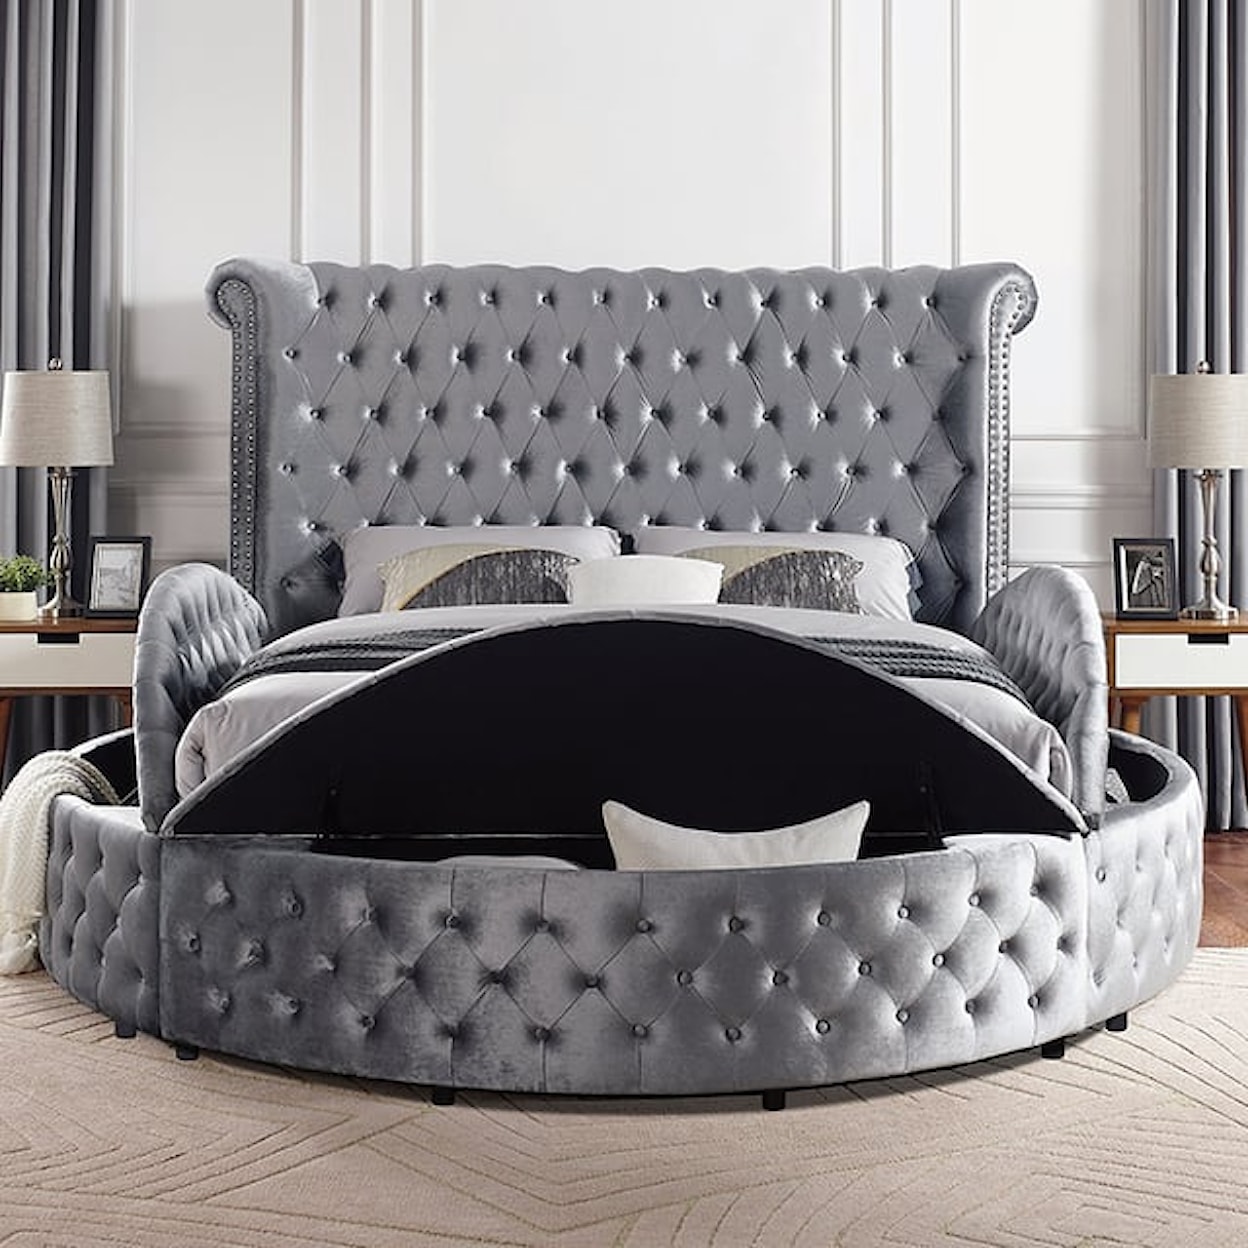 Furniture of America Sansom Queen Upholstered Round Bed